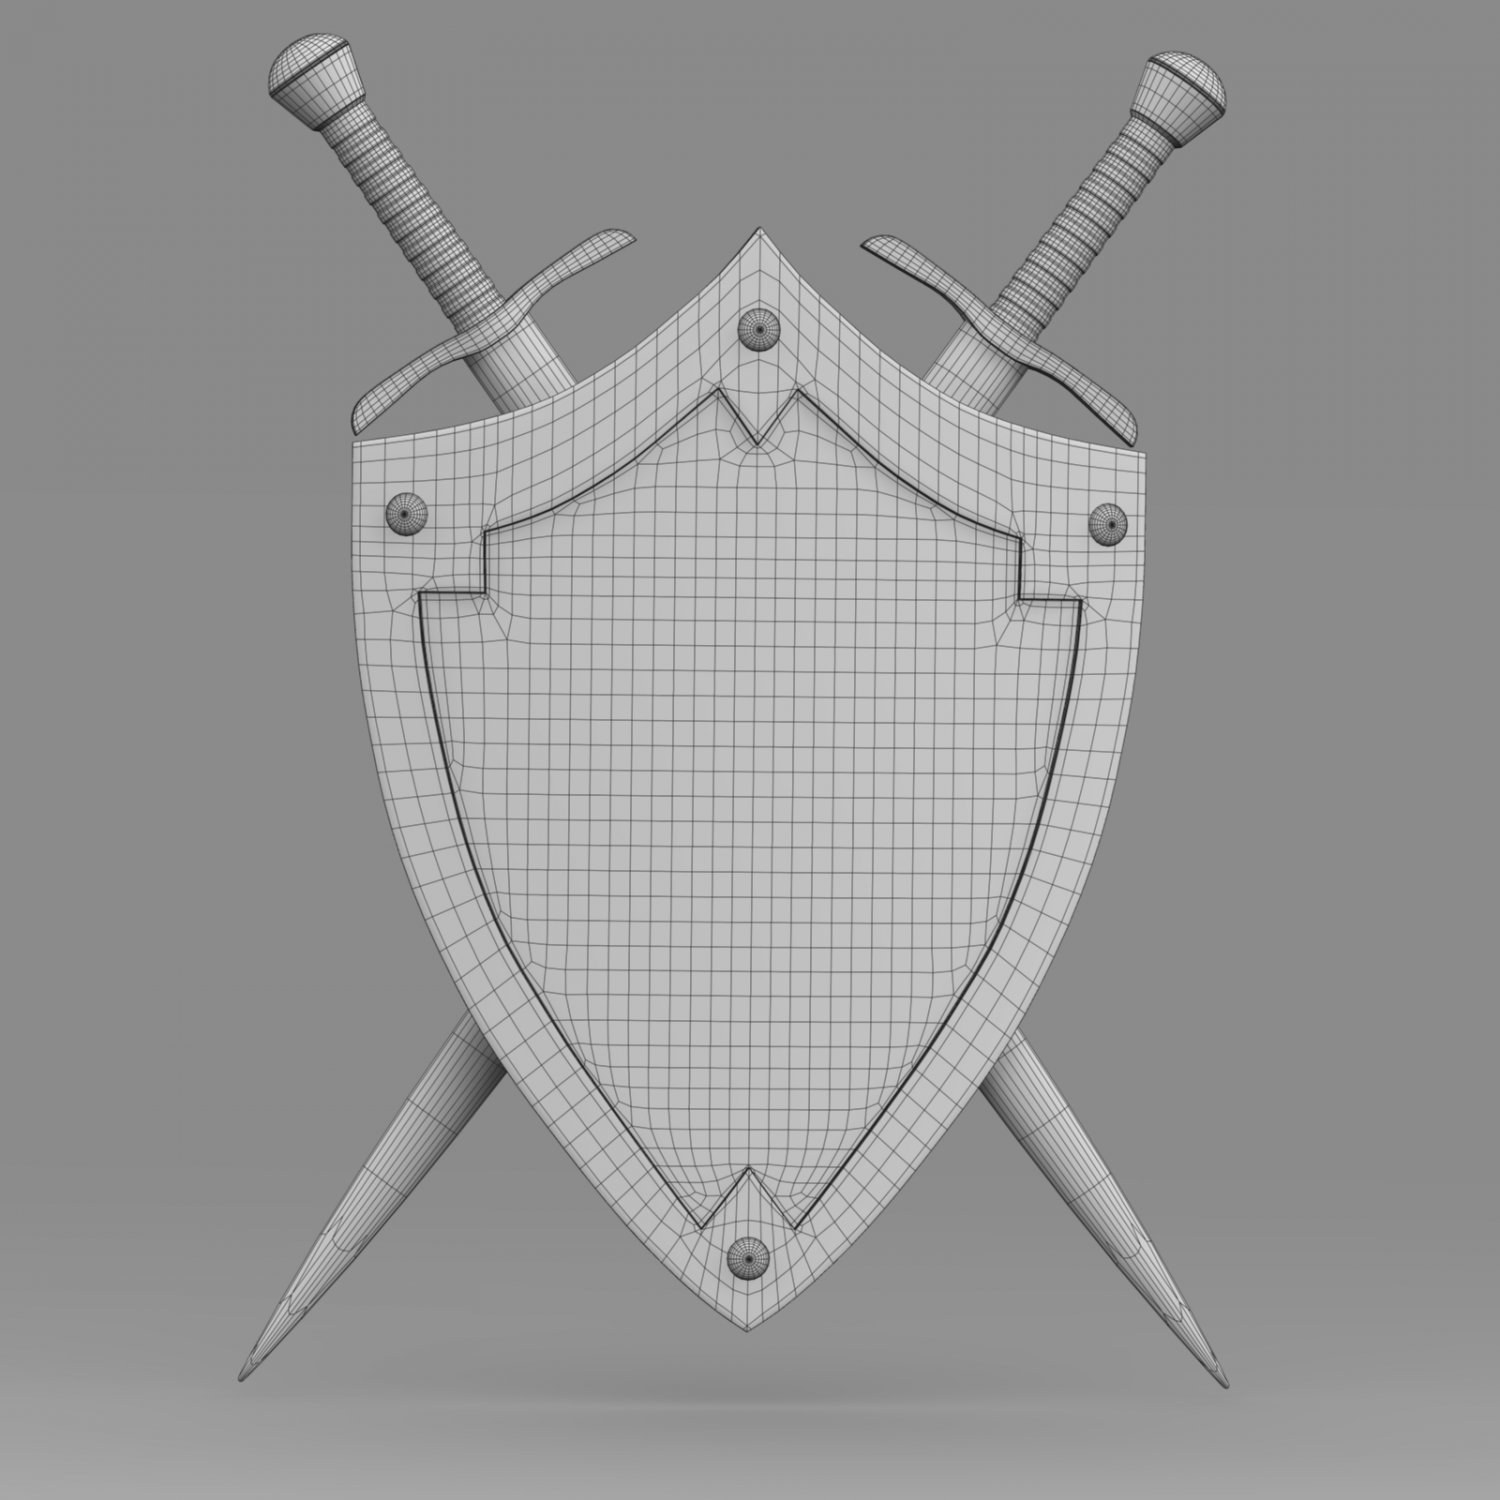 escudo vikingo remachado high-poly and low-poly 3D Model in Shield 3DExport